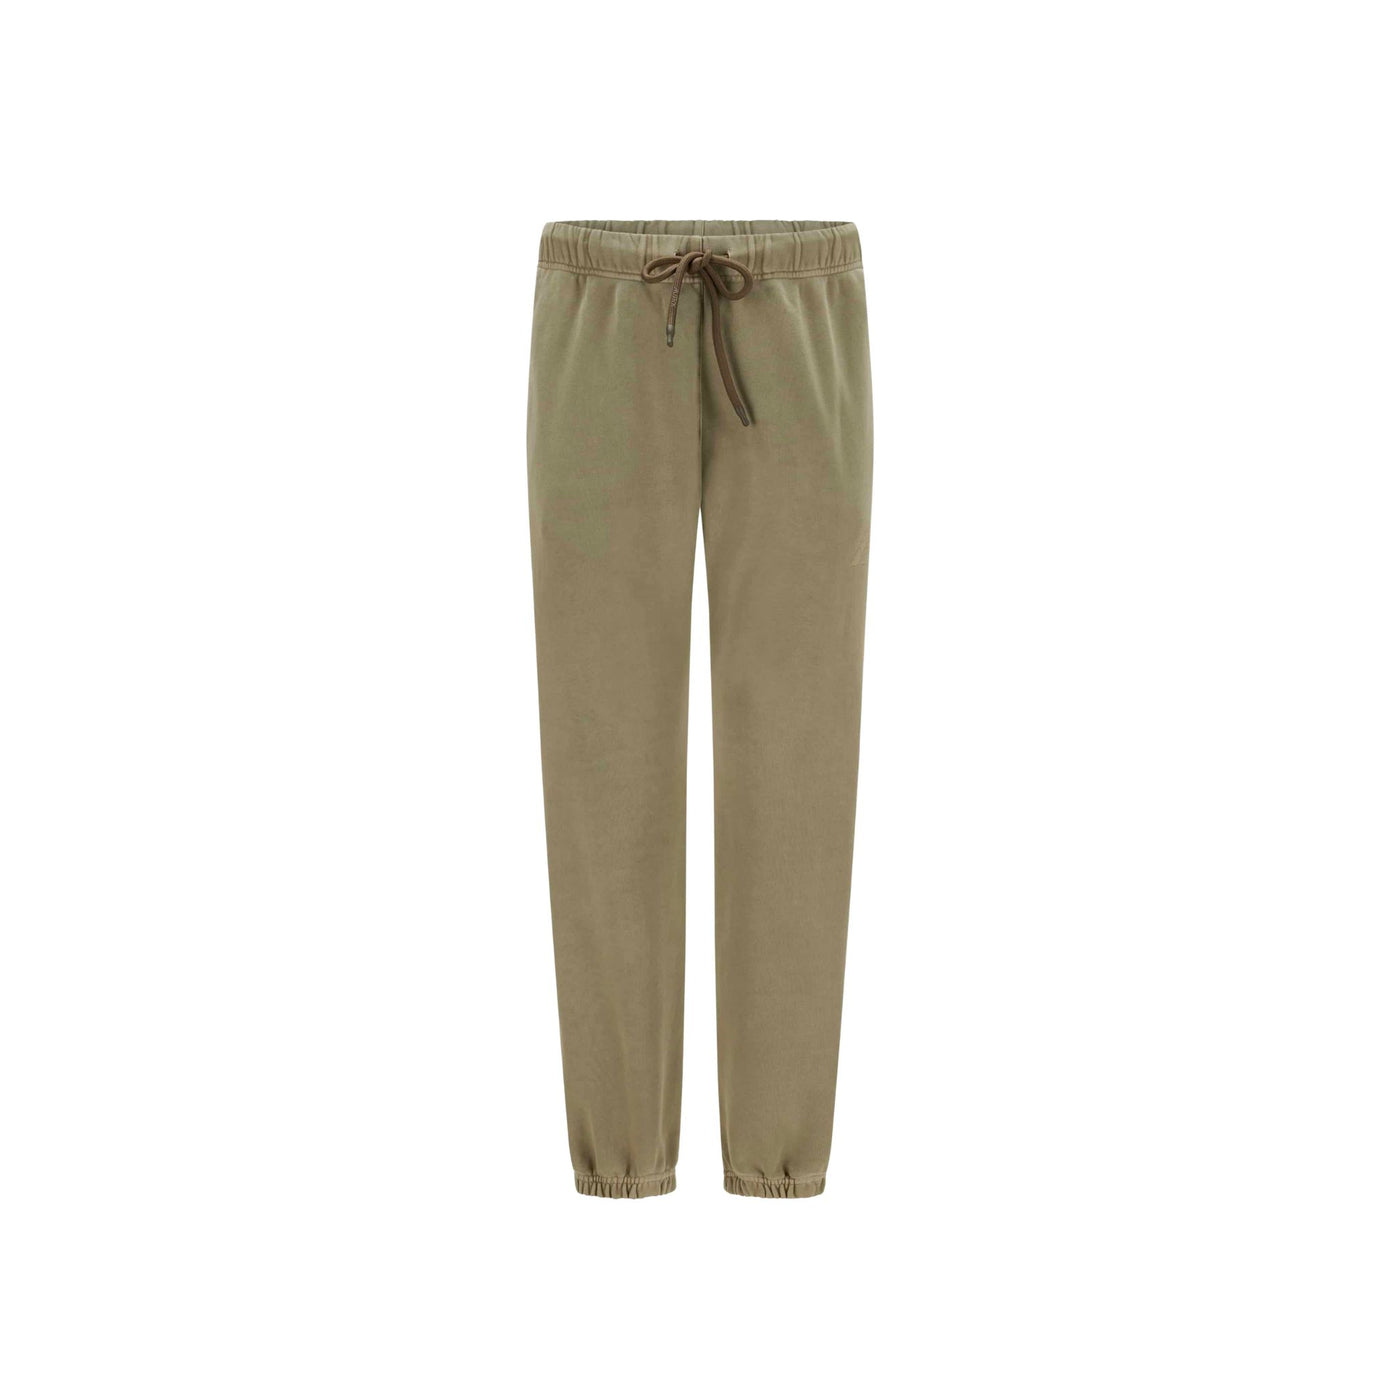 Men's trousers in solid color 